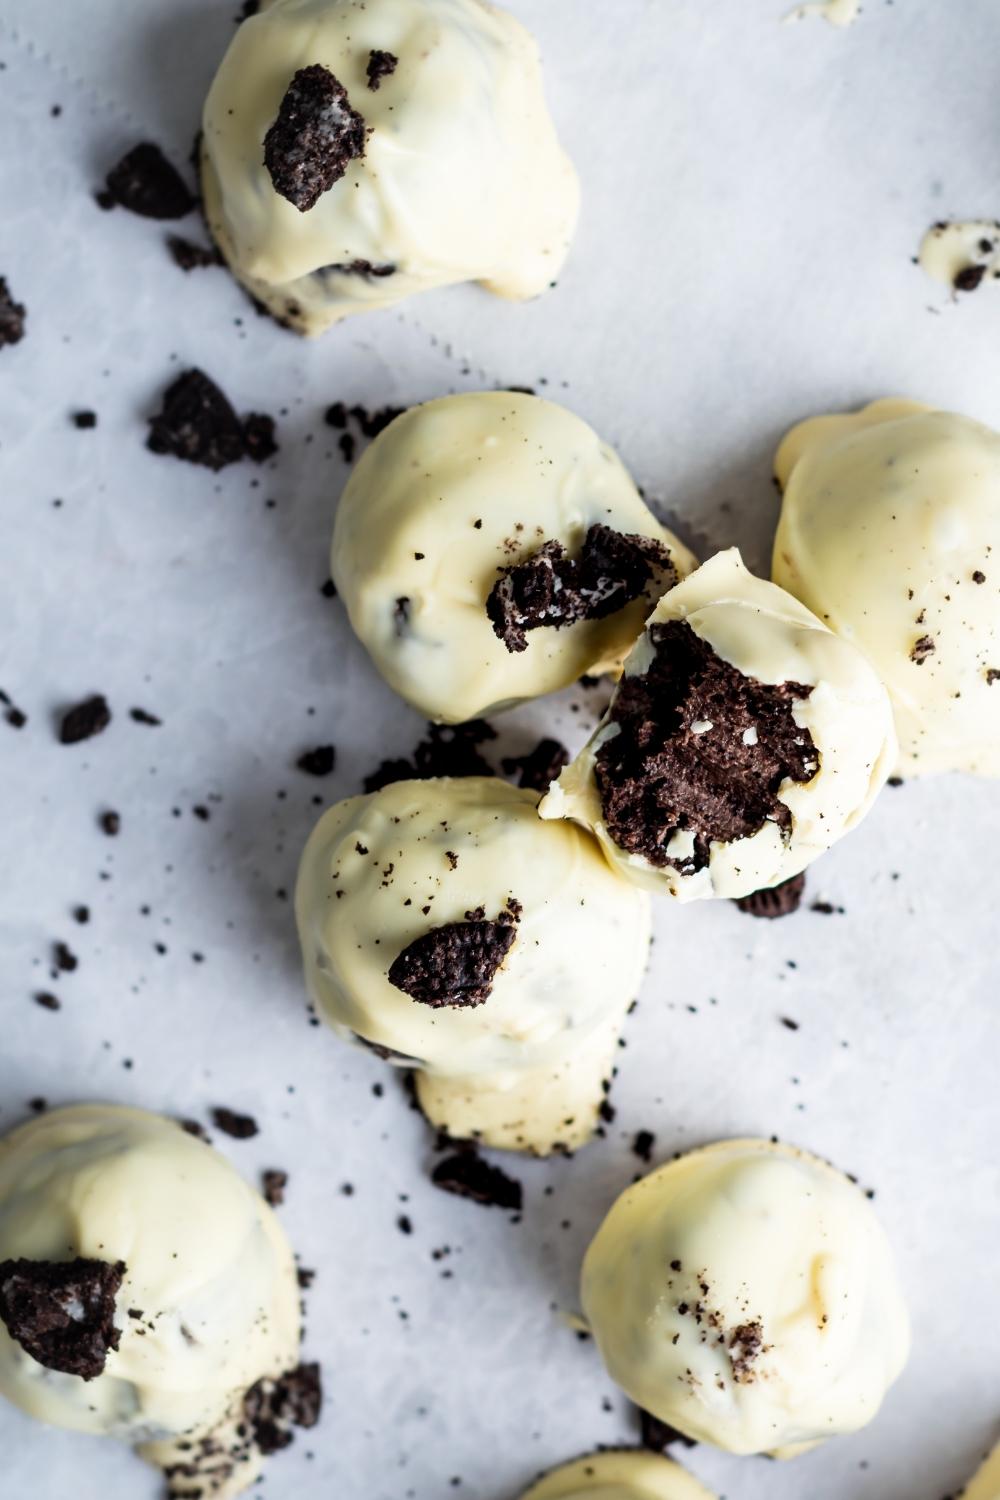 An overhead view of oreo balls on parchment paper. Each oreo ball is dipped in white chocolate and topped with crumbled oreos. One oreo ball has a bite taken out of it.